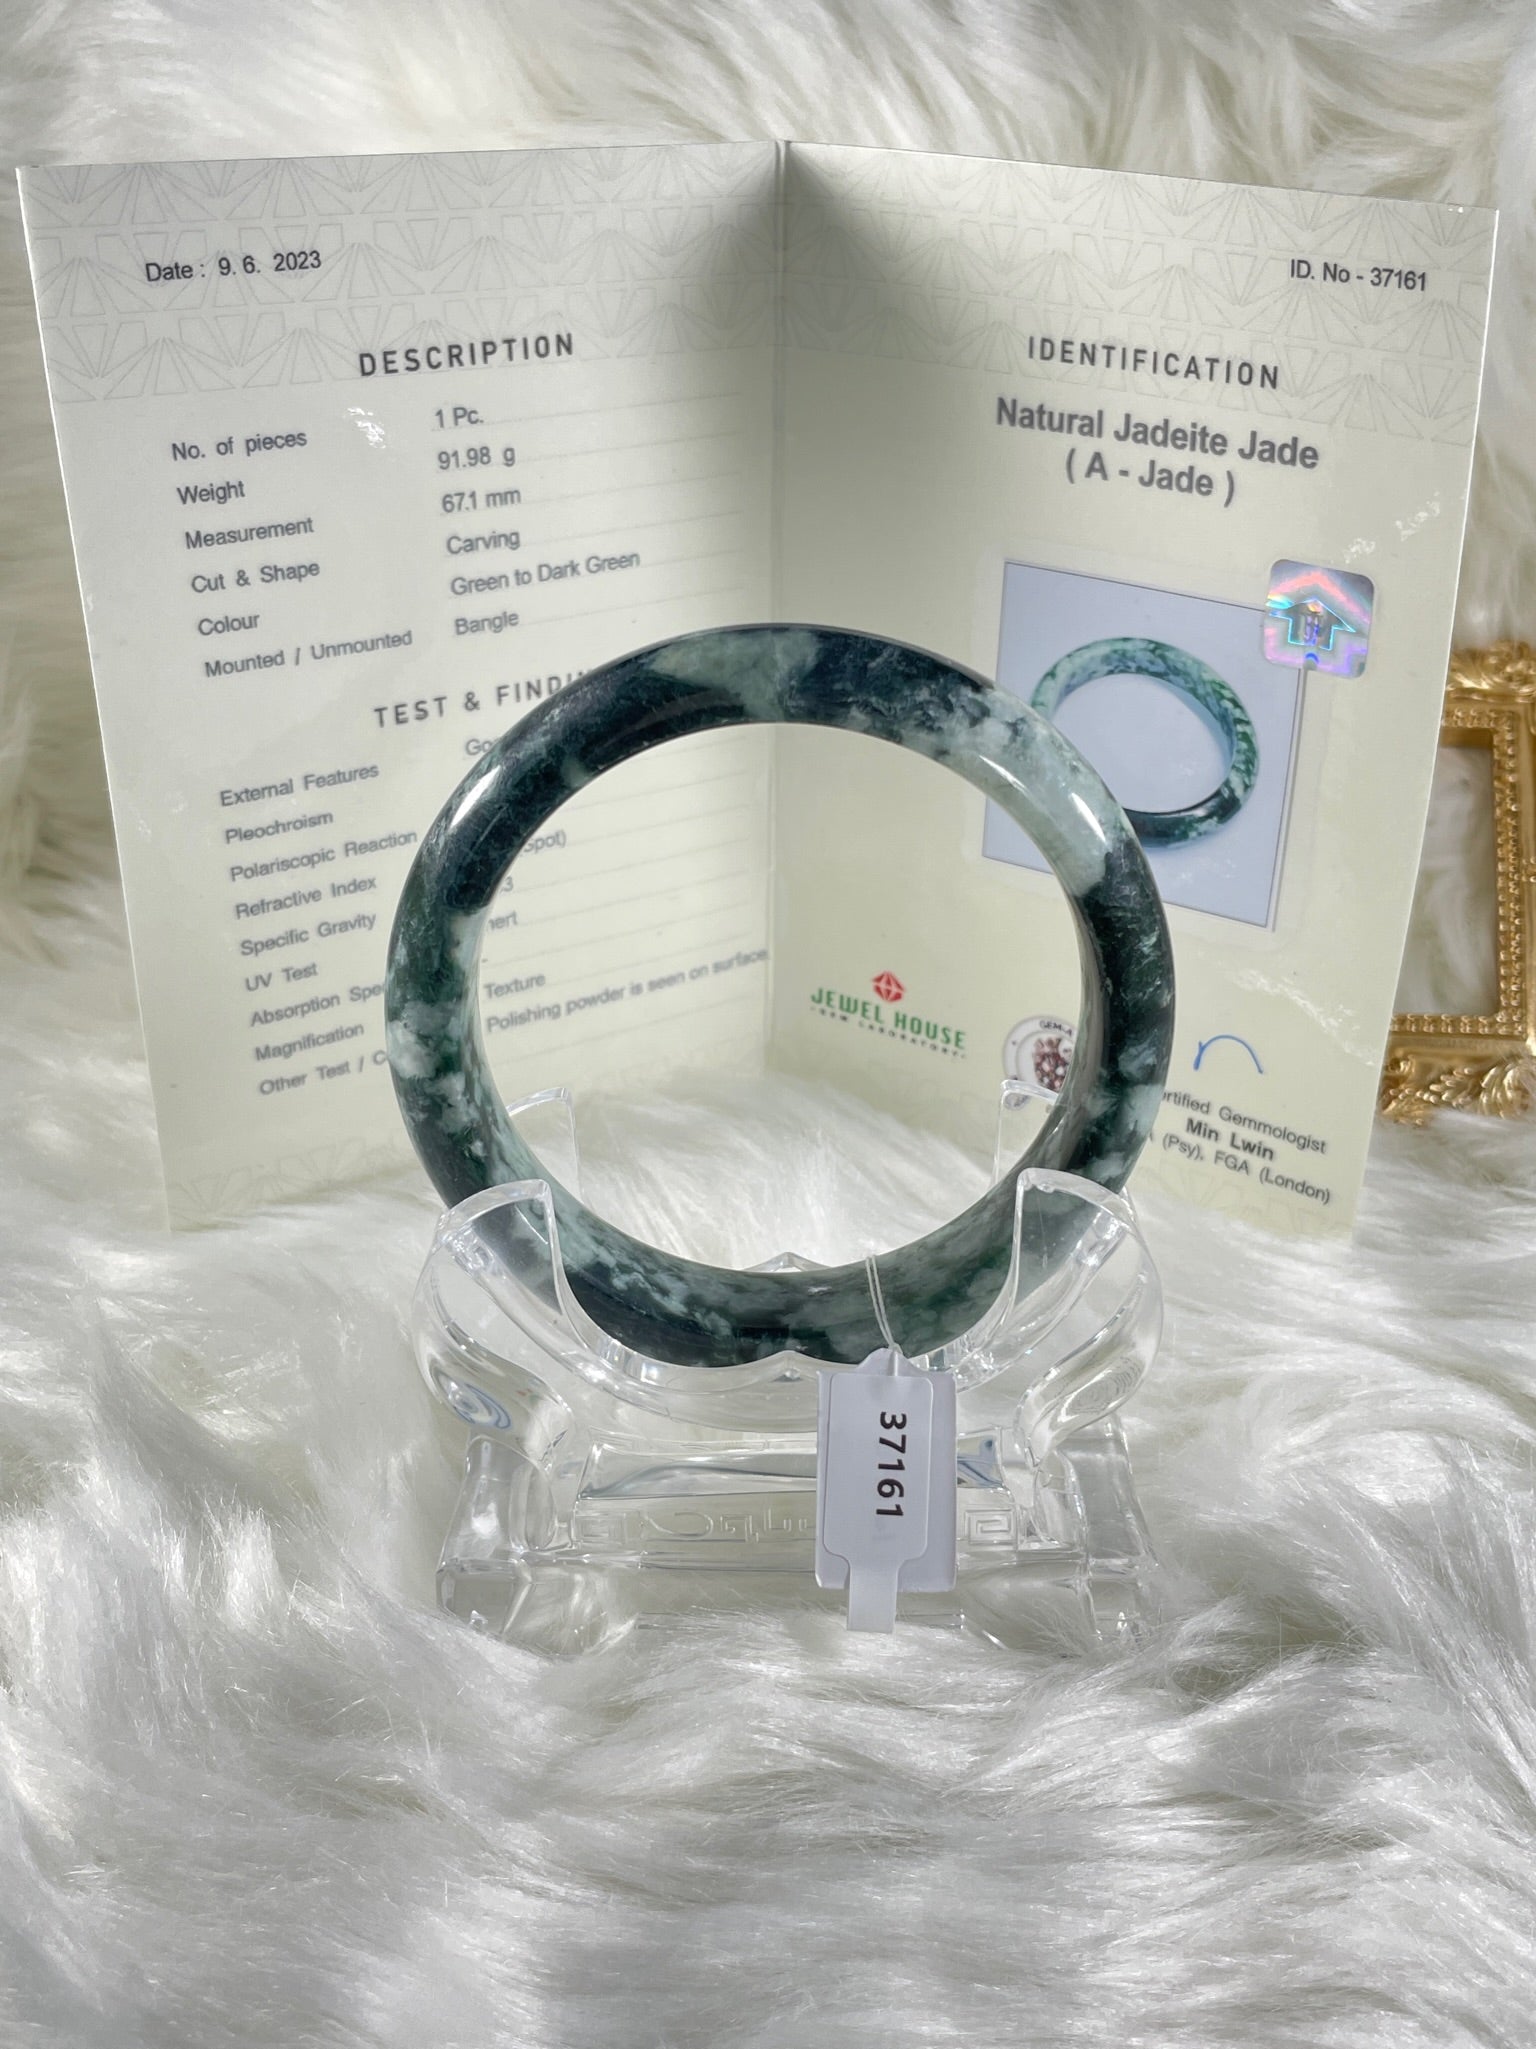 Grade A Natural Jade Bangle with certificate #37161